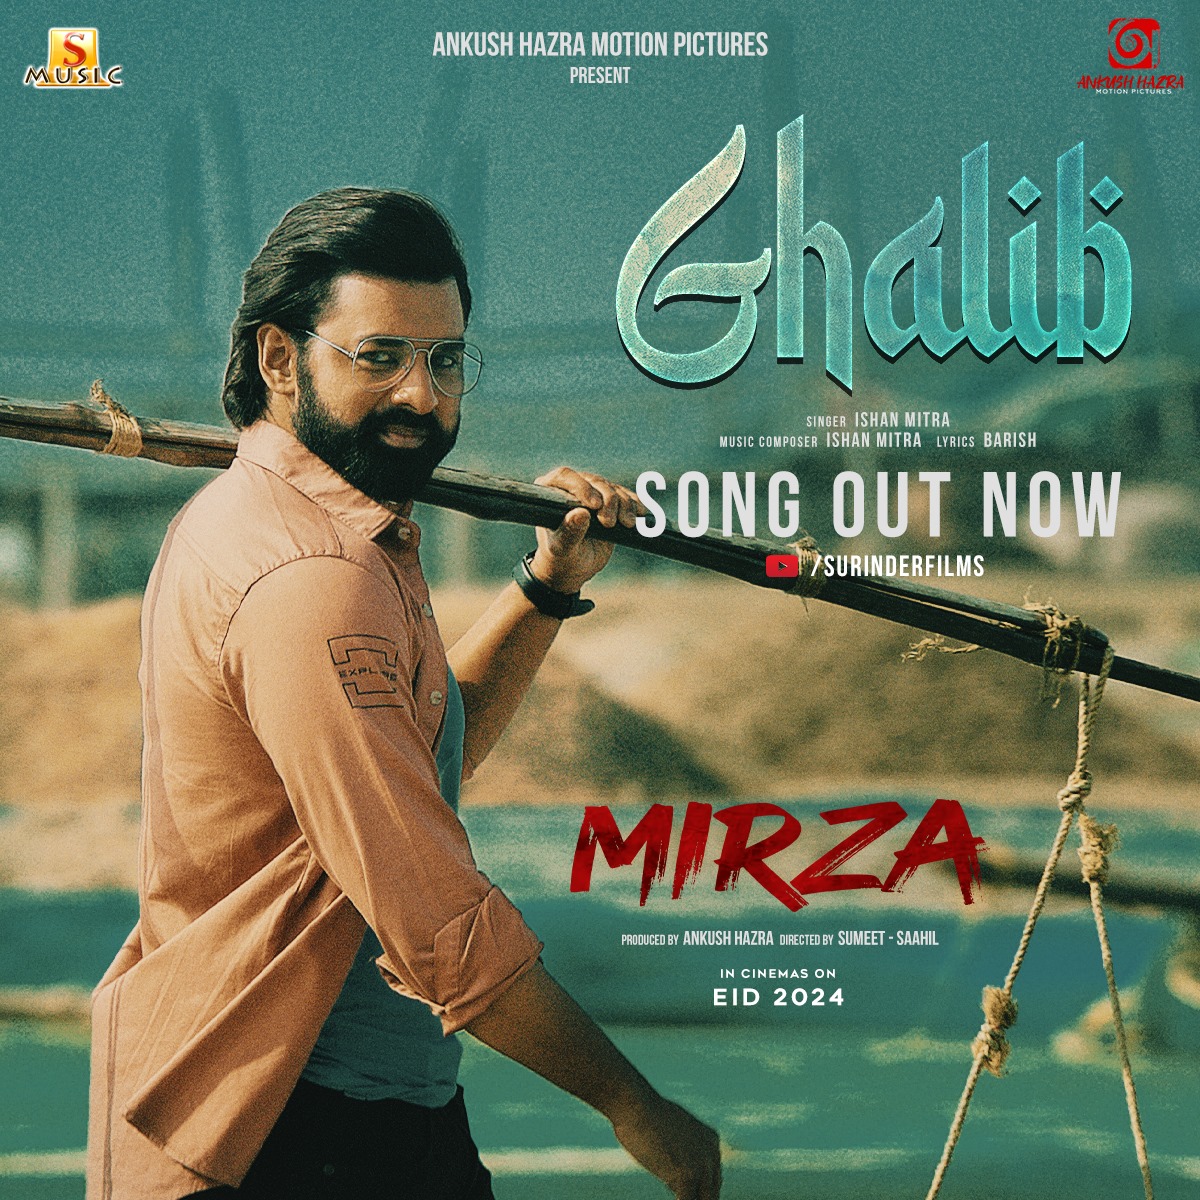 Fall in love all over again with the latest romantic song #Ghalib. Listen now and feel the magic of love! 💕🎶 Watch the full video song : bit.ly/Ghalib_MirzaSo… #Mirza at the theatres from 9th of April! 🎬 @AHMotionPicture @AnkushLoveUAll @Love_Oindrila @KGunedited